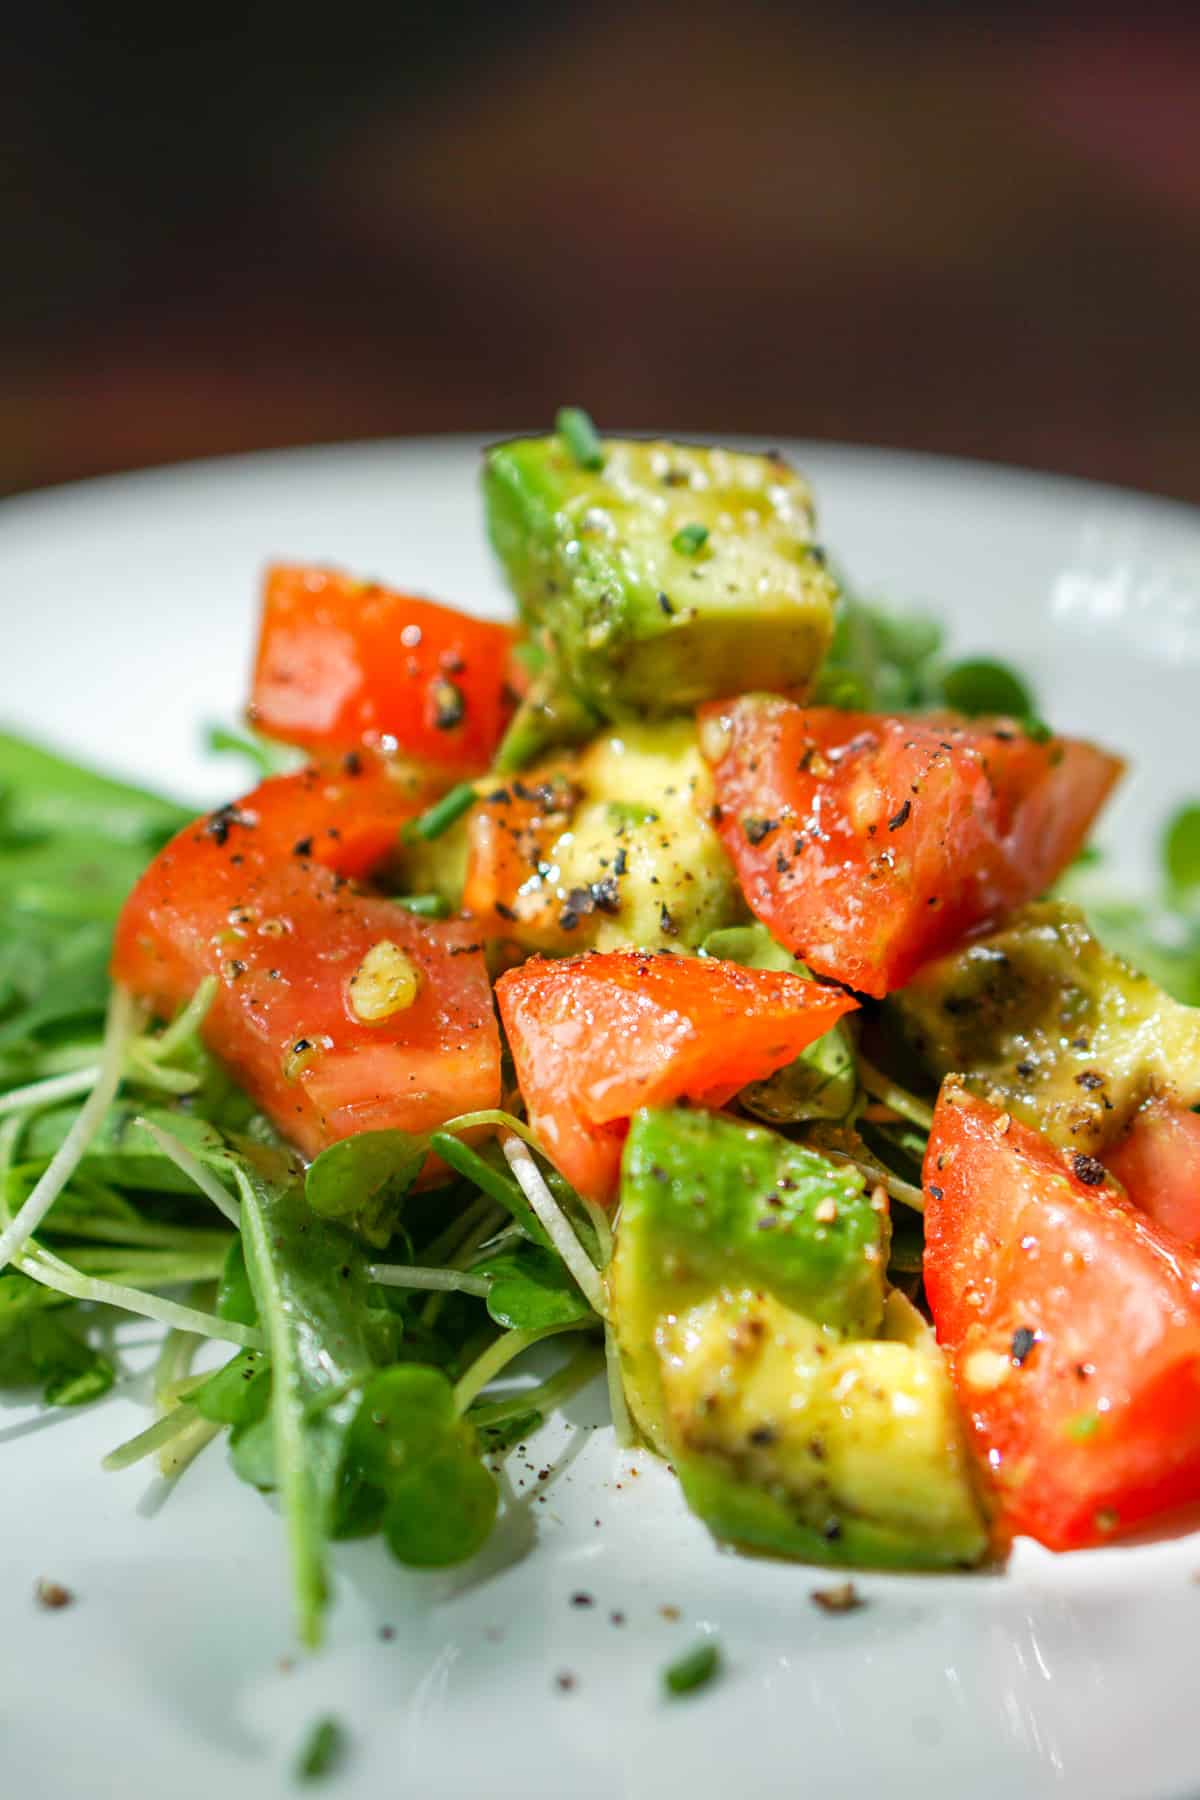 Quick, Easy and Nutritious Salad: Tomato and Avo on Arugula and Micro Greens